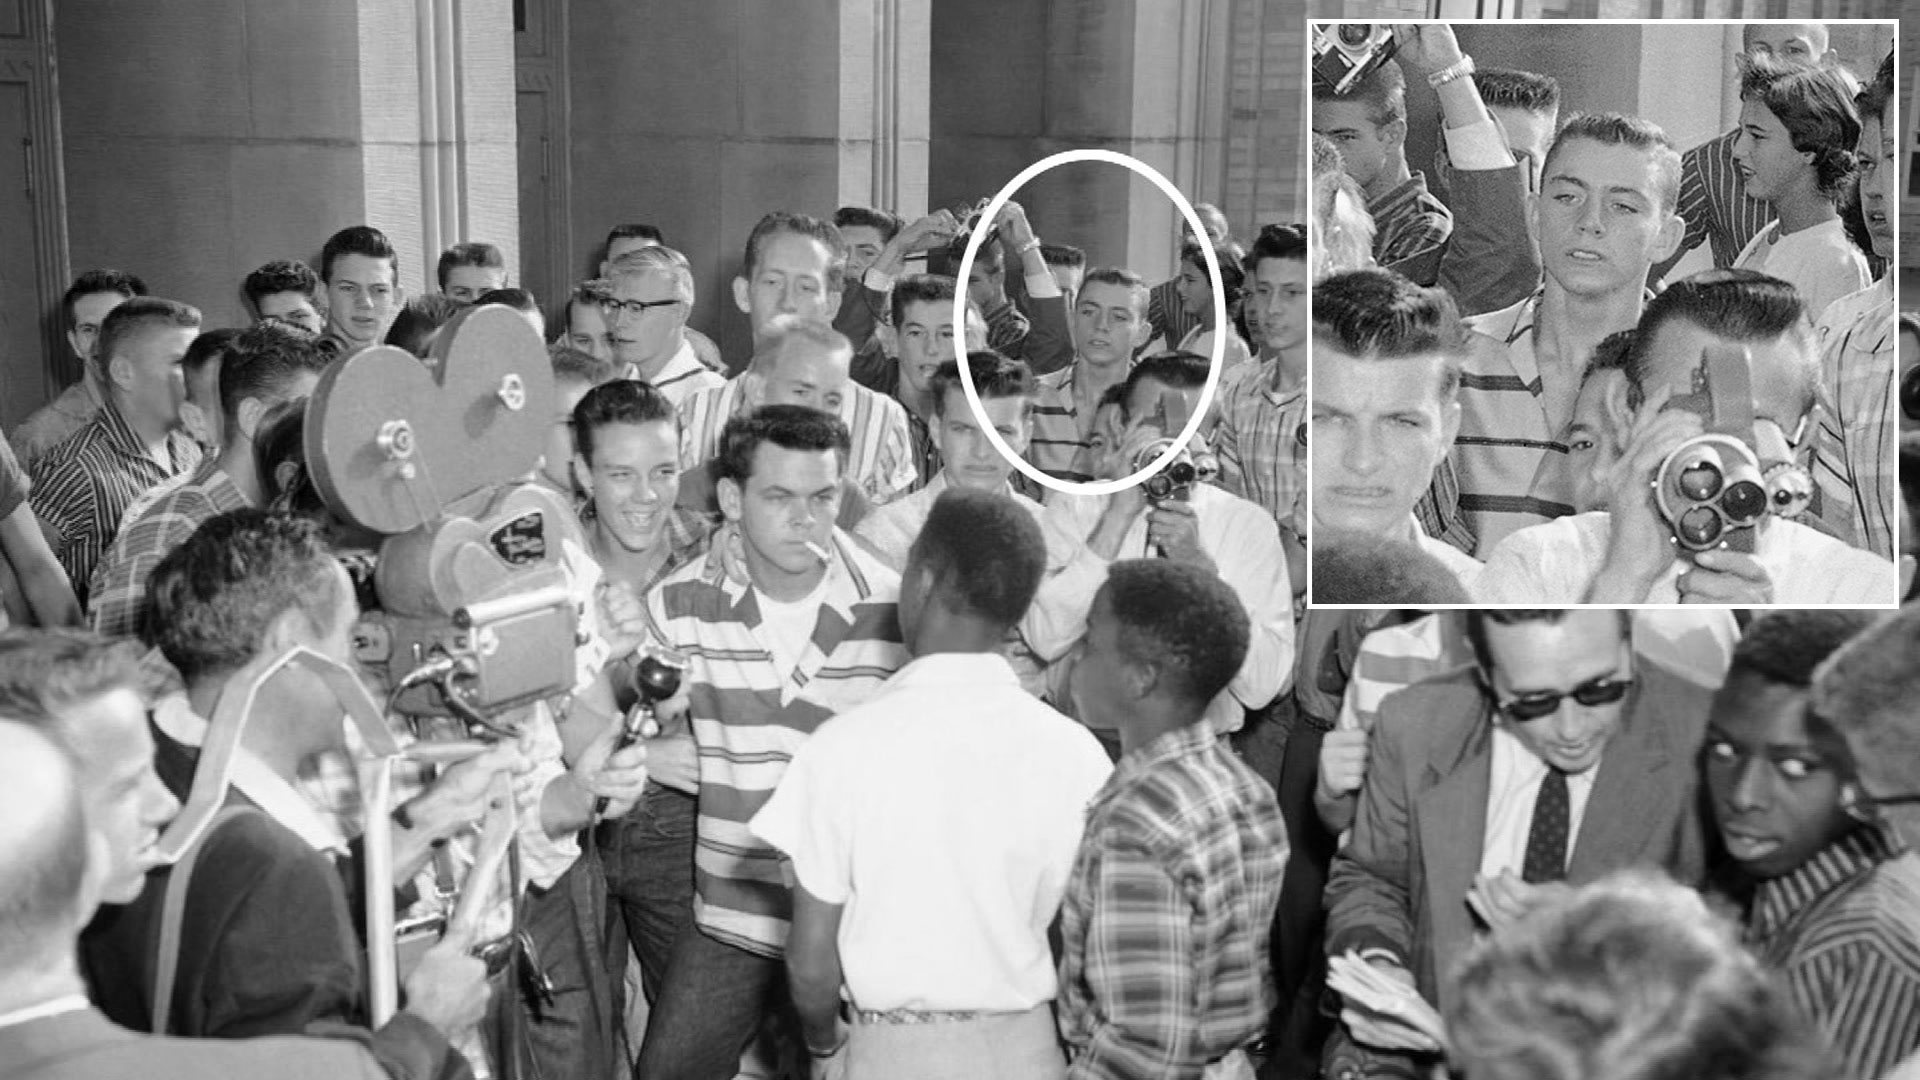 ‘I've Forgiven Him,' Says Black Student in 1957 Photo With Jerry
Jones Outside Segregated School